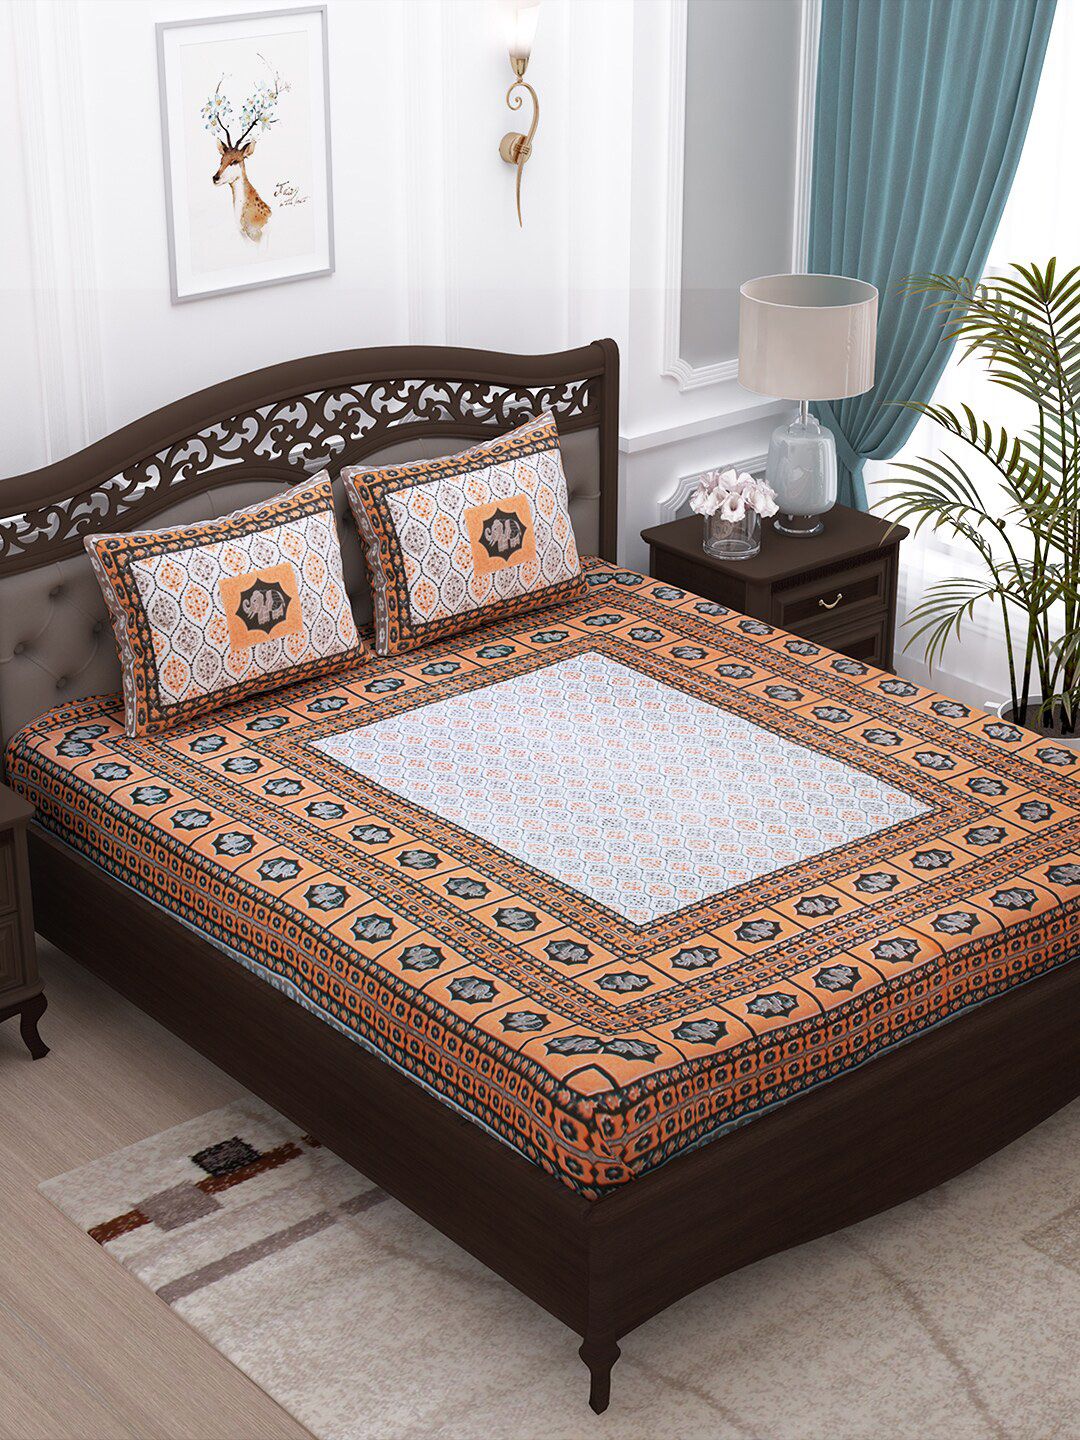 Story@home Peach-Coloured & Black Ethnic Motifs 152 TC Cotton 1  King Bedsheet with 2 Pillow Covers Price in India